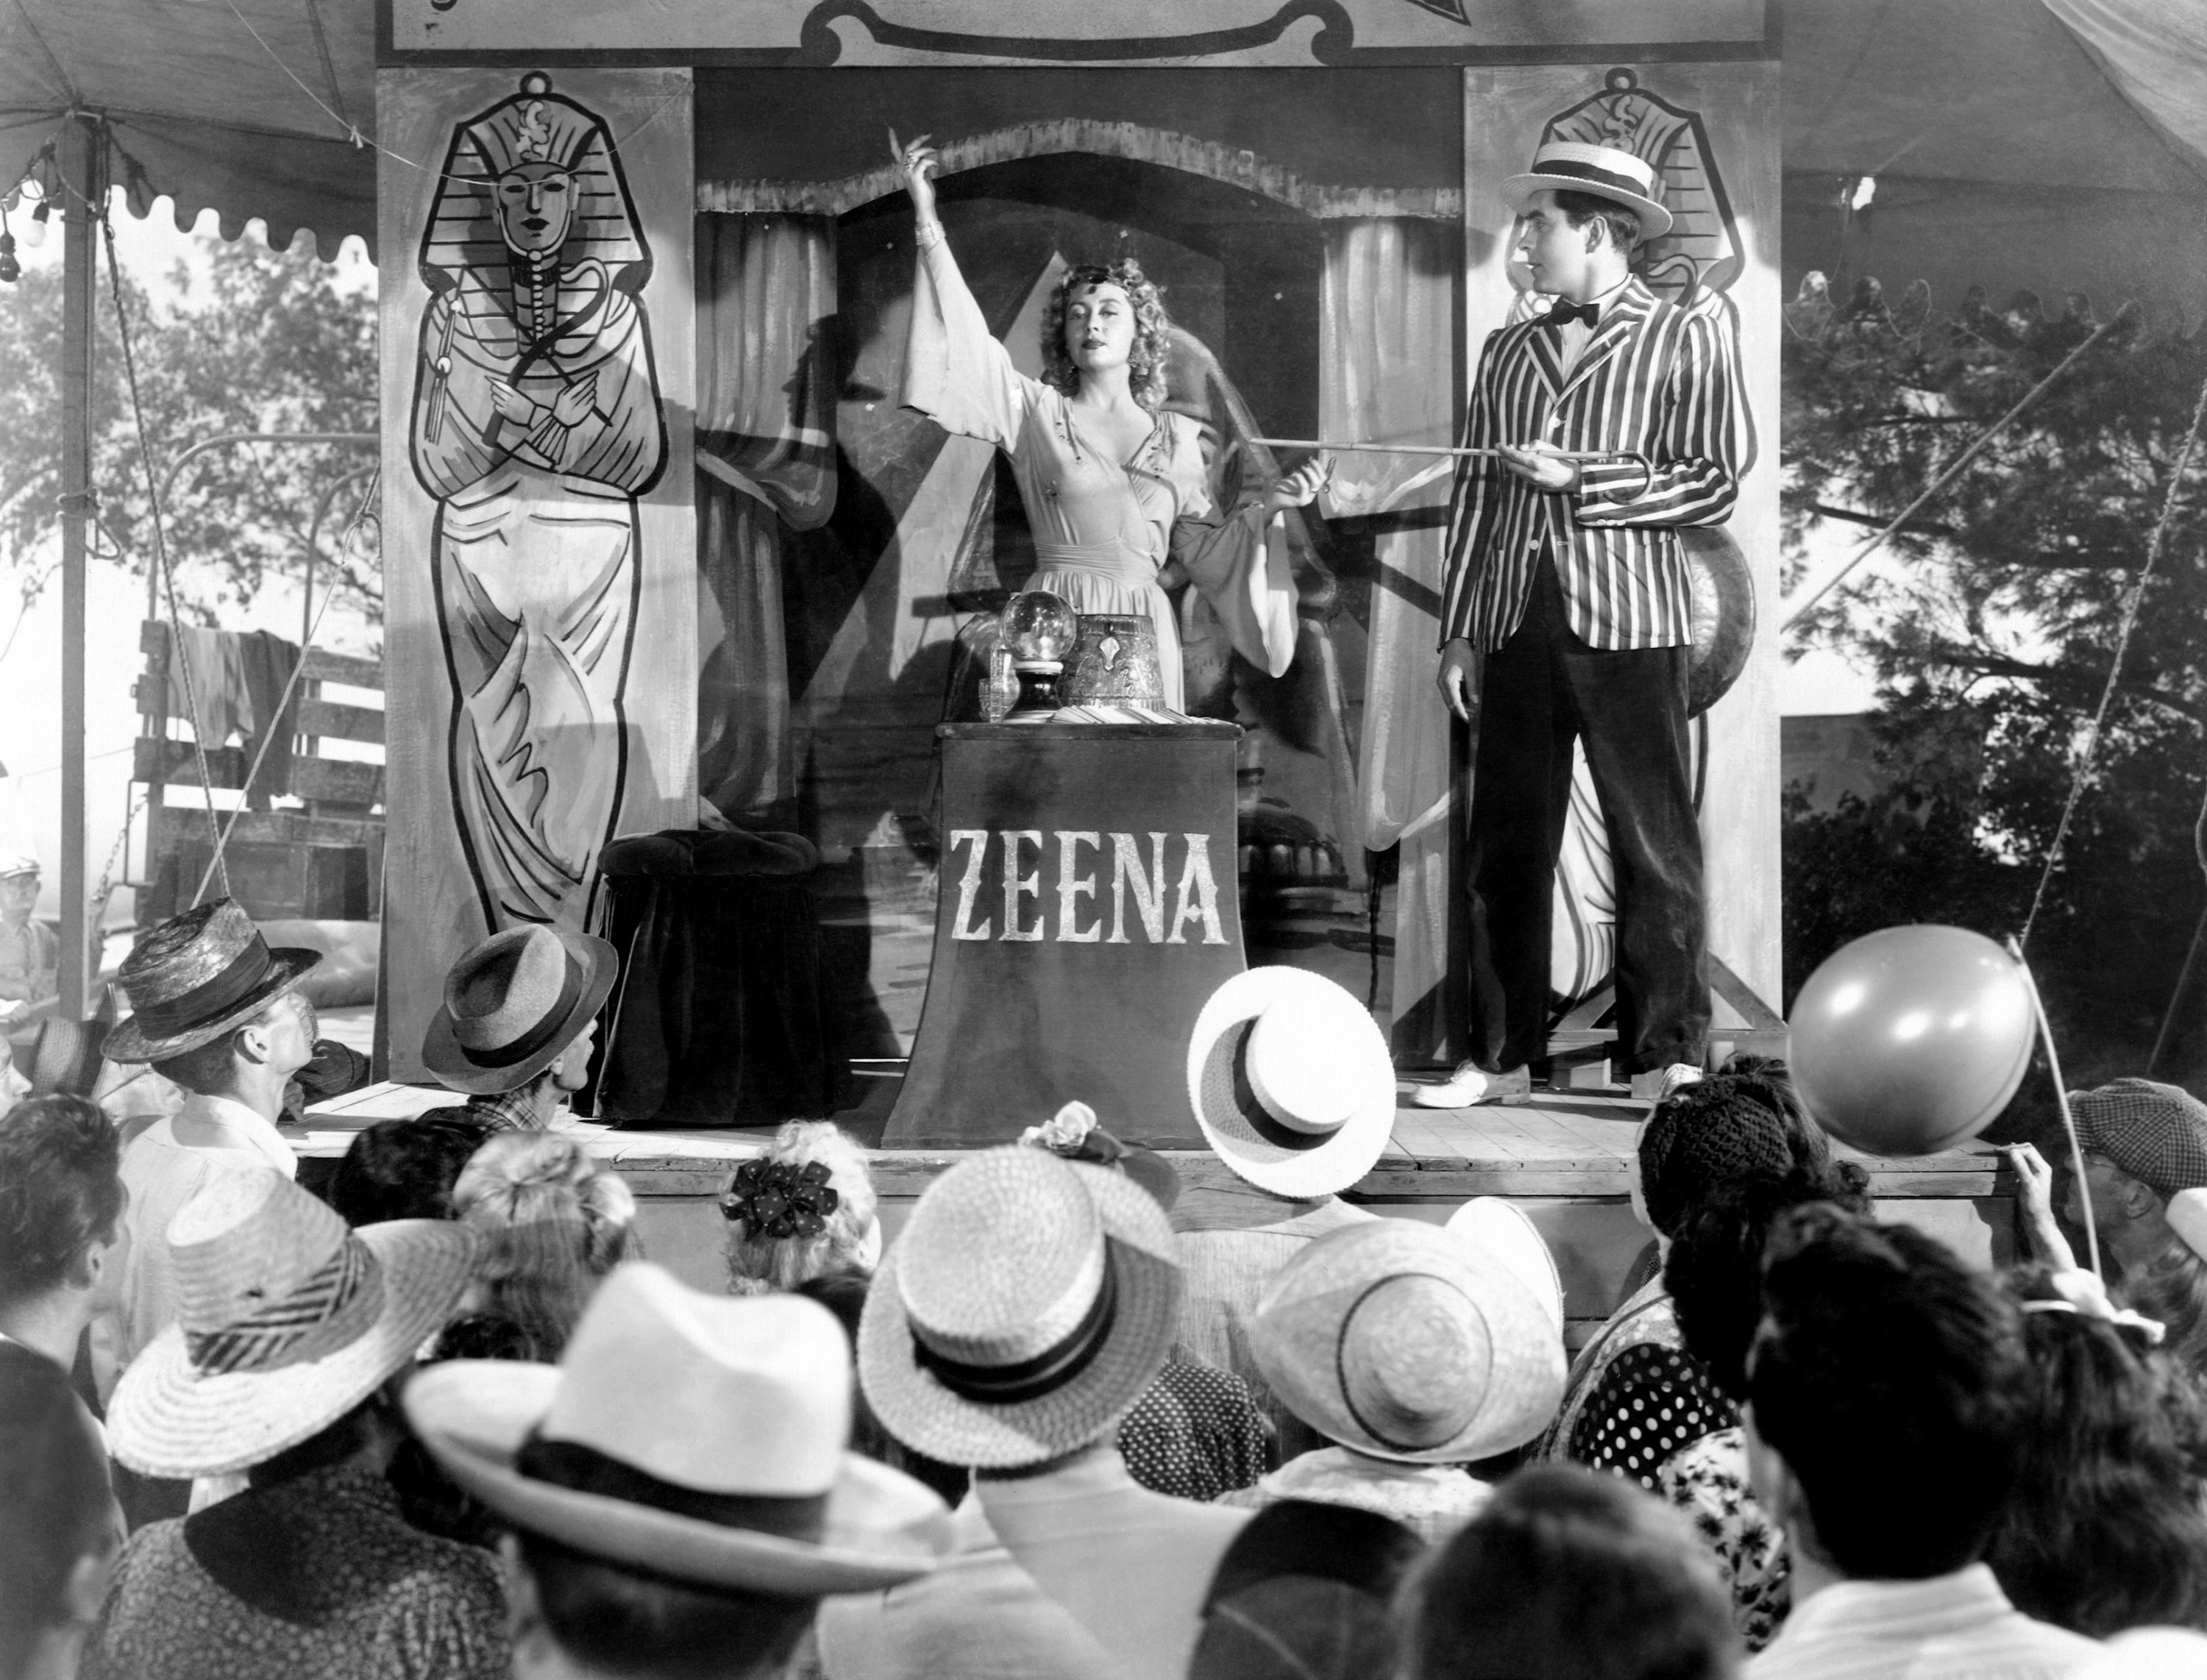 Joan Blondell, Tyrone Power acting as sideshow performers in the old film